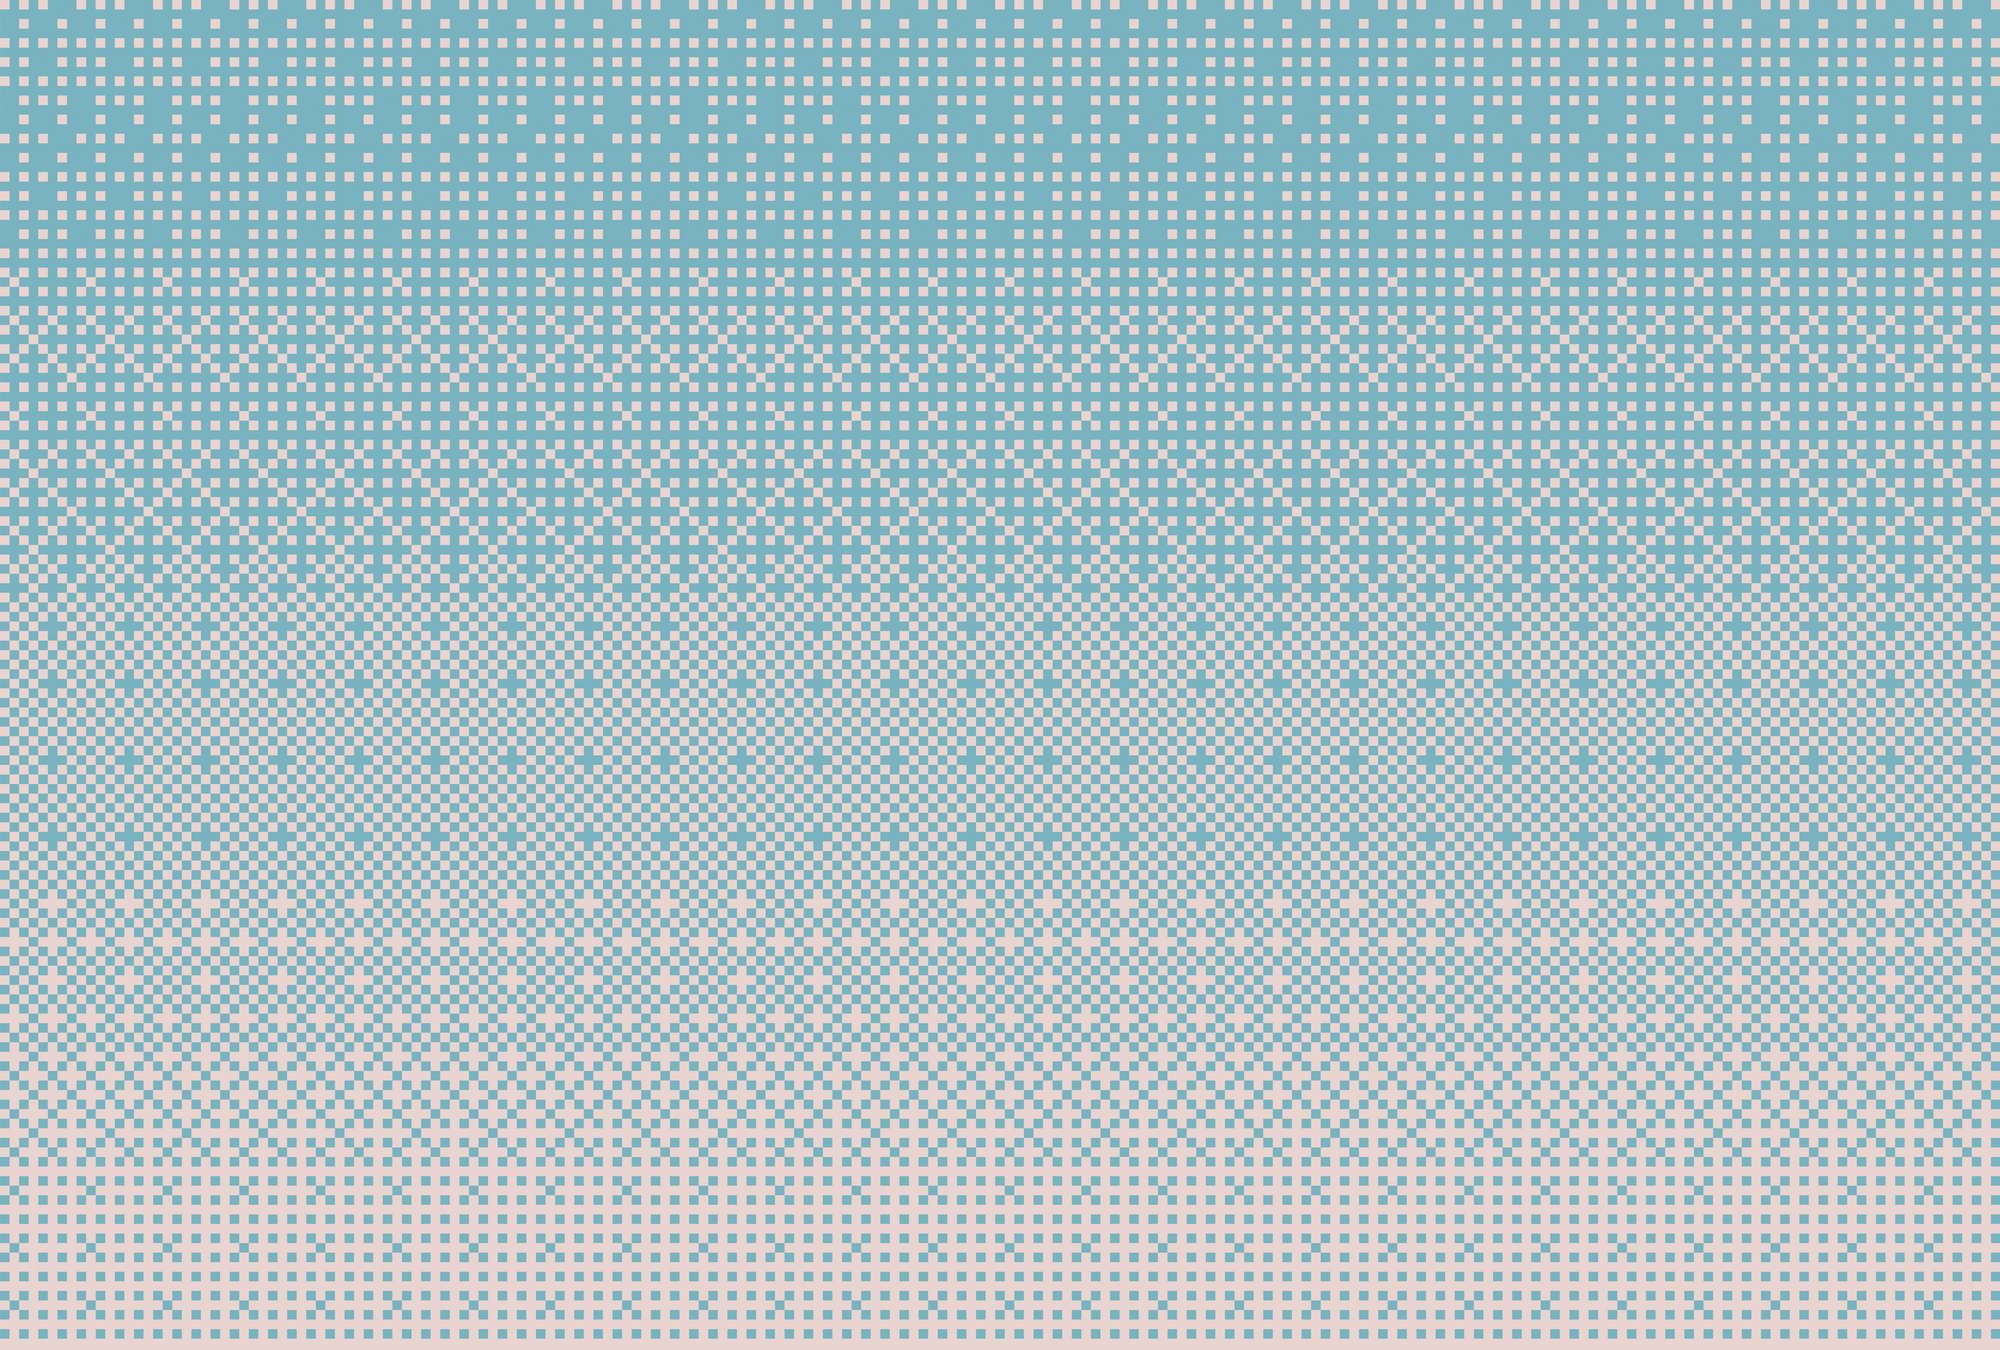             Photo wallpaper »pixi blue« - Cross stitch pattern with pixel style - Blue | Smooth, slightly shiny premium non-woven fabric
        